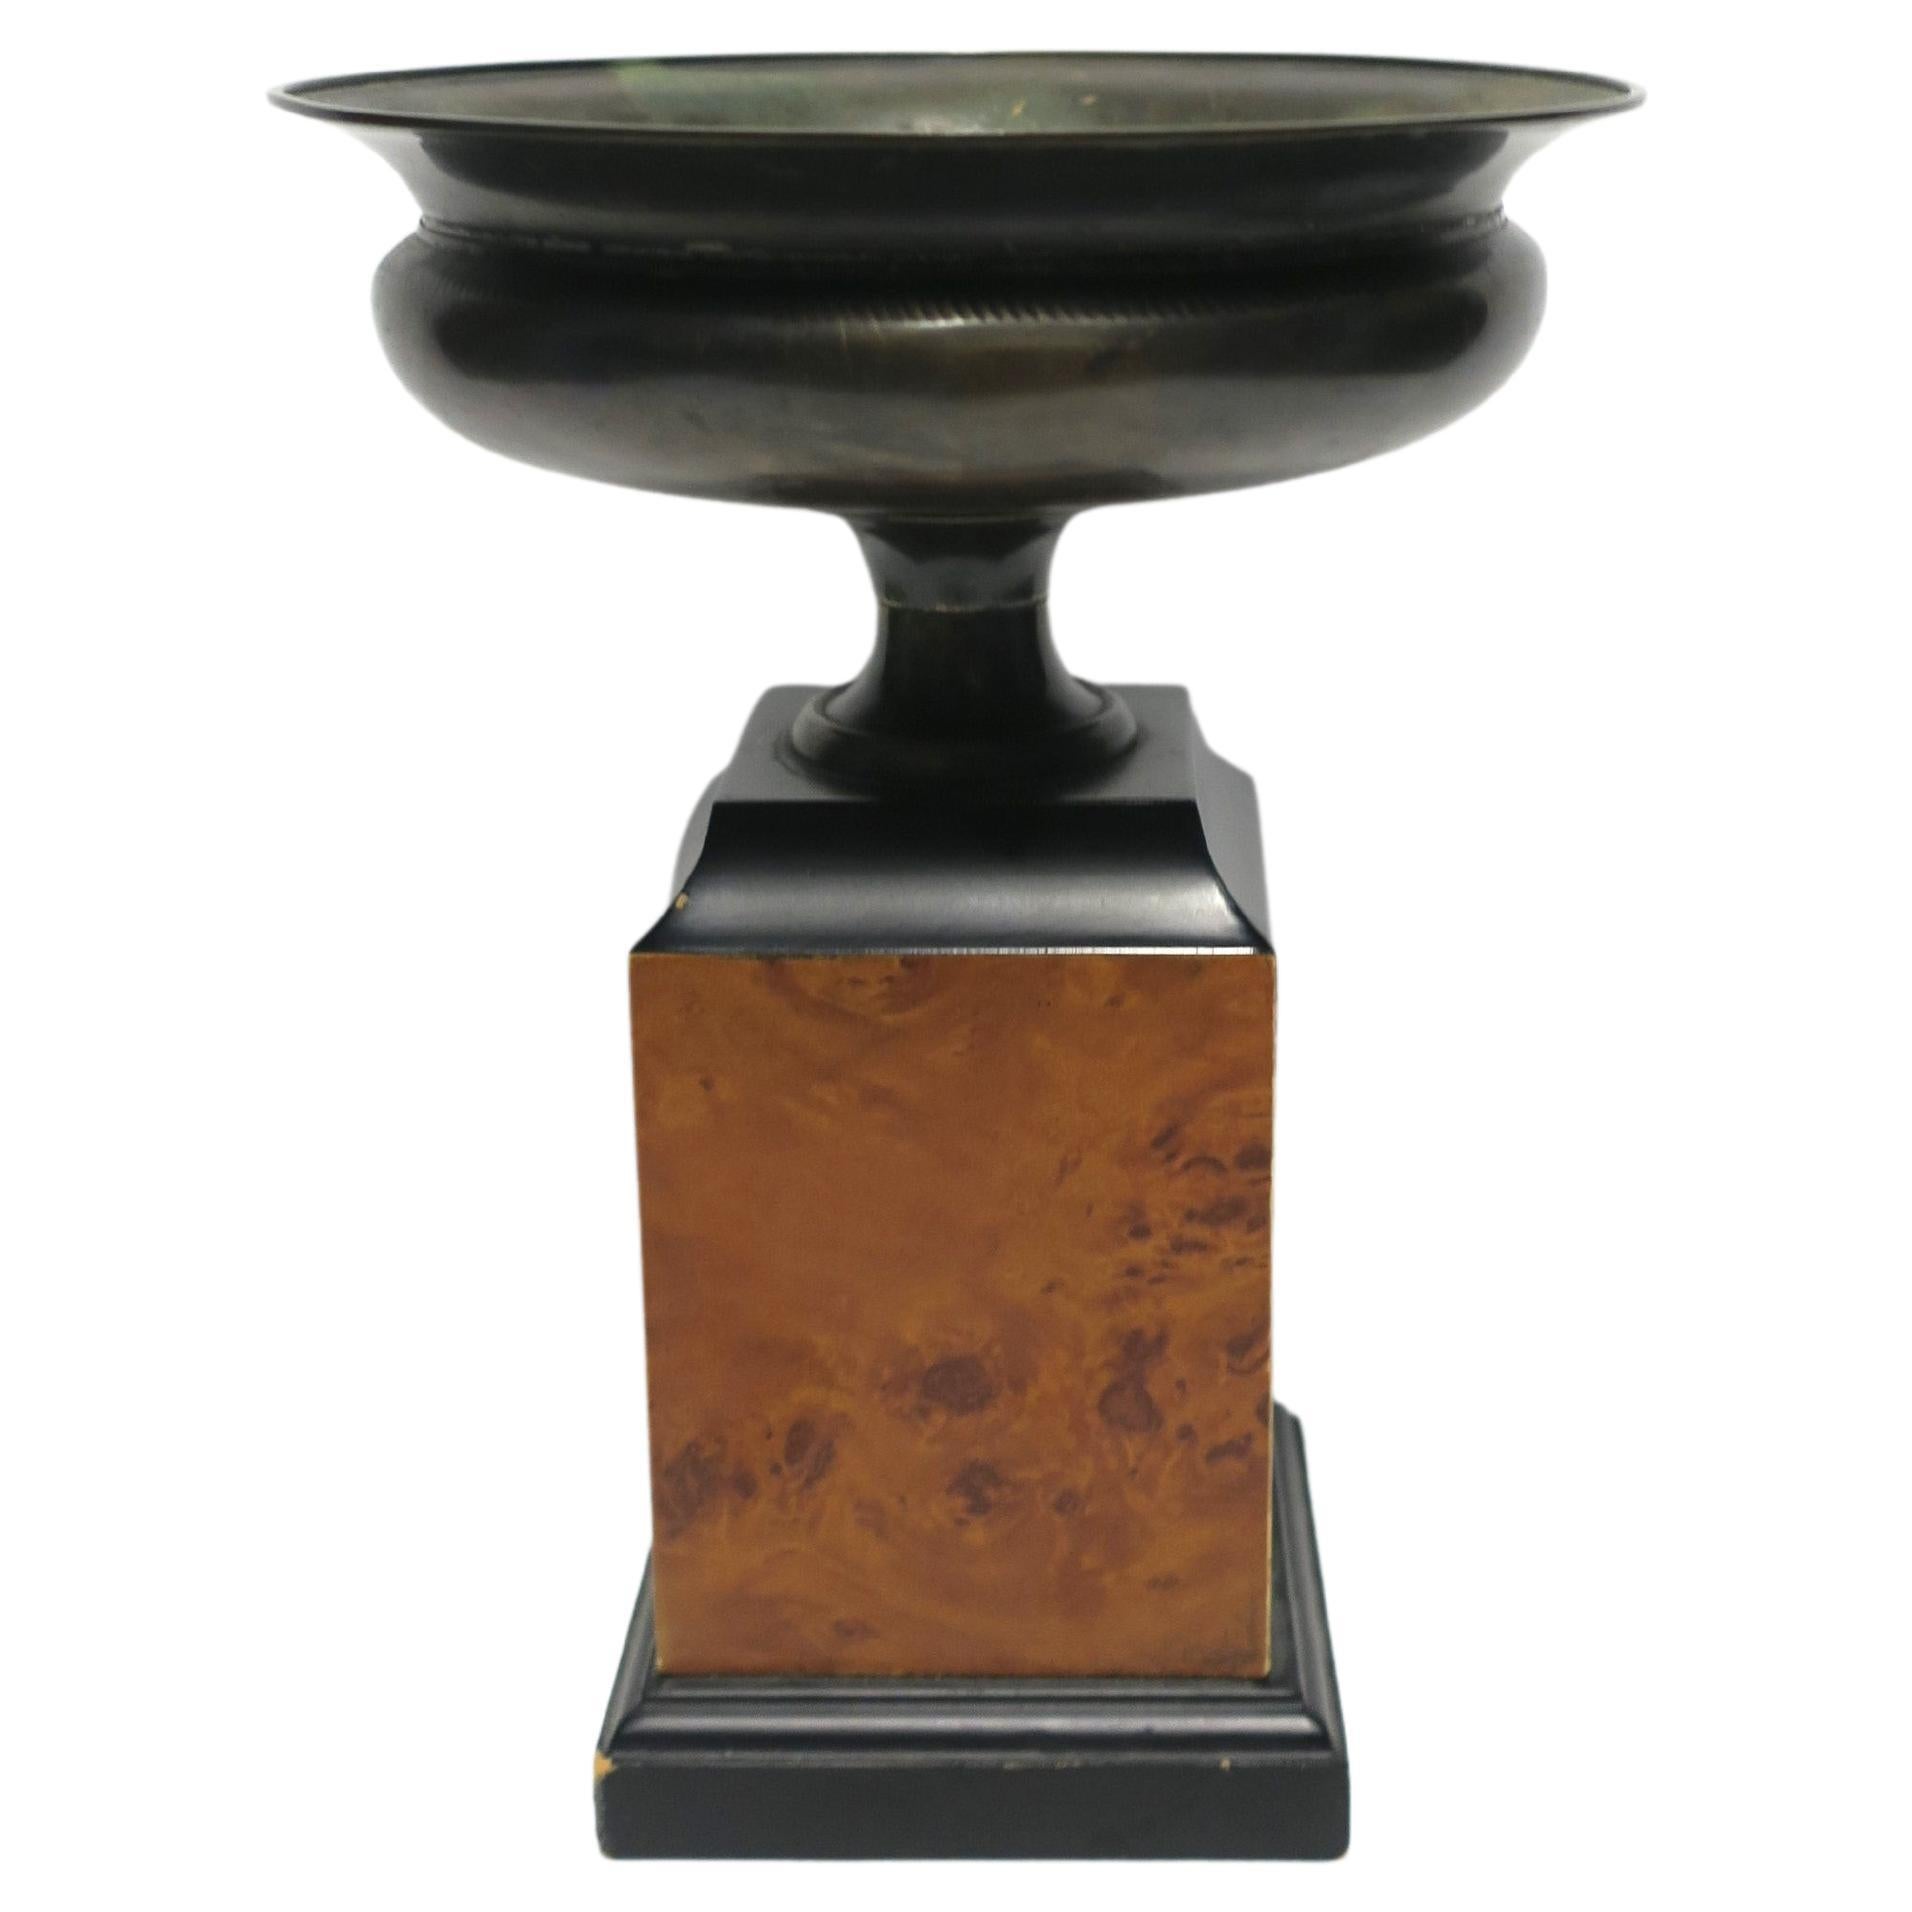 A bronzed metal urn attached to a black wood column plinth base with a brown laminated veneered burl, in the Neoclassical design style, circa 1970s. Great as a standalone piece, or to hold a flower/plant (jardinière), or other items (such as